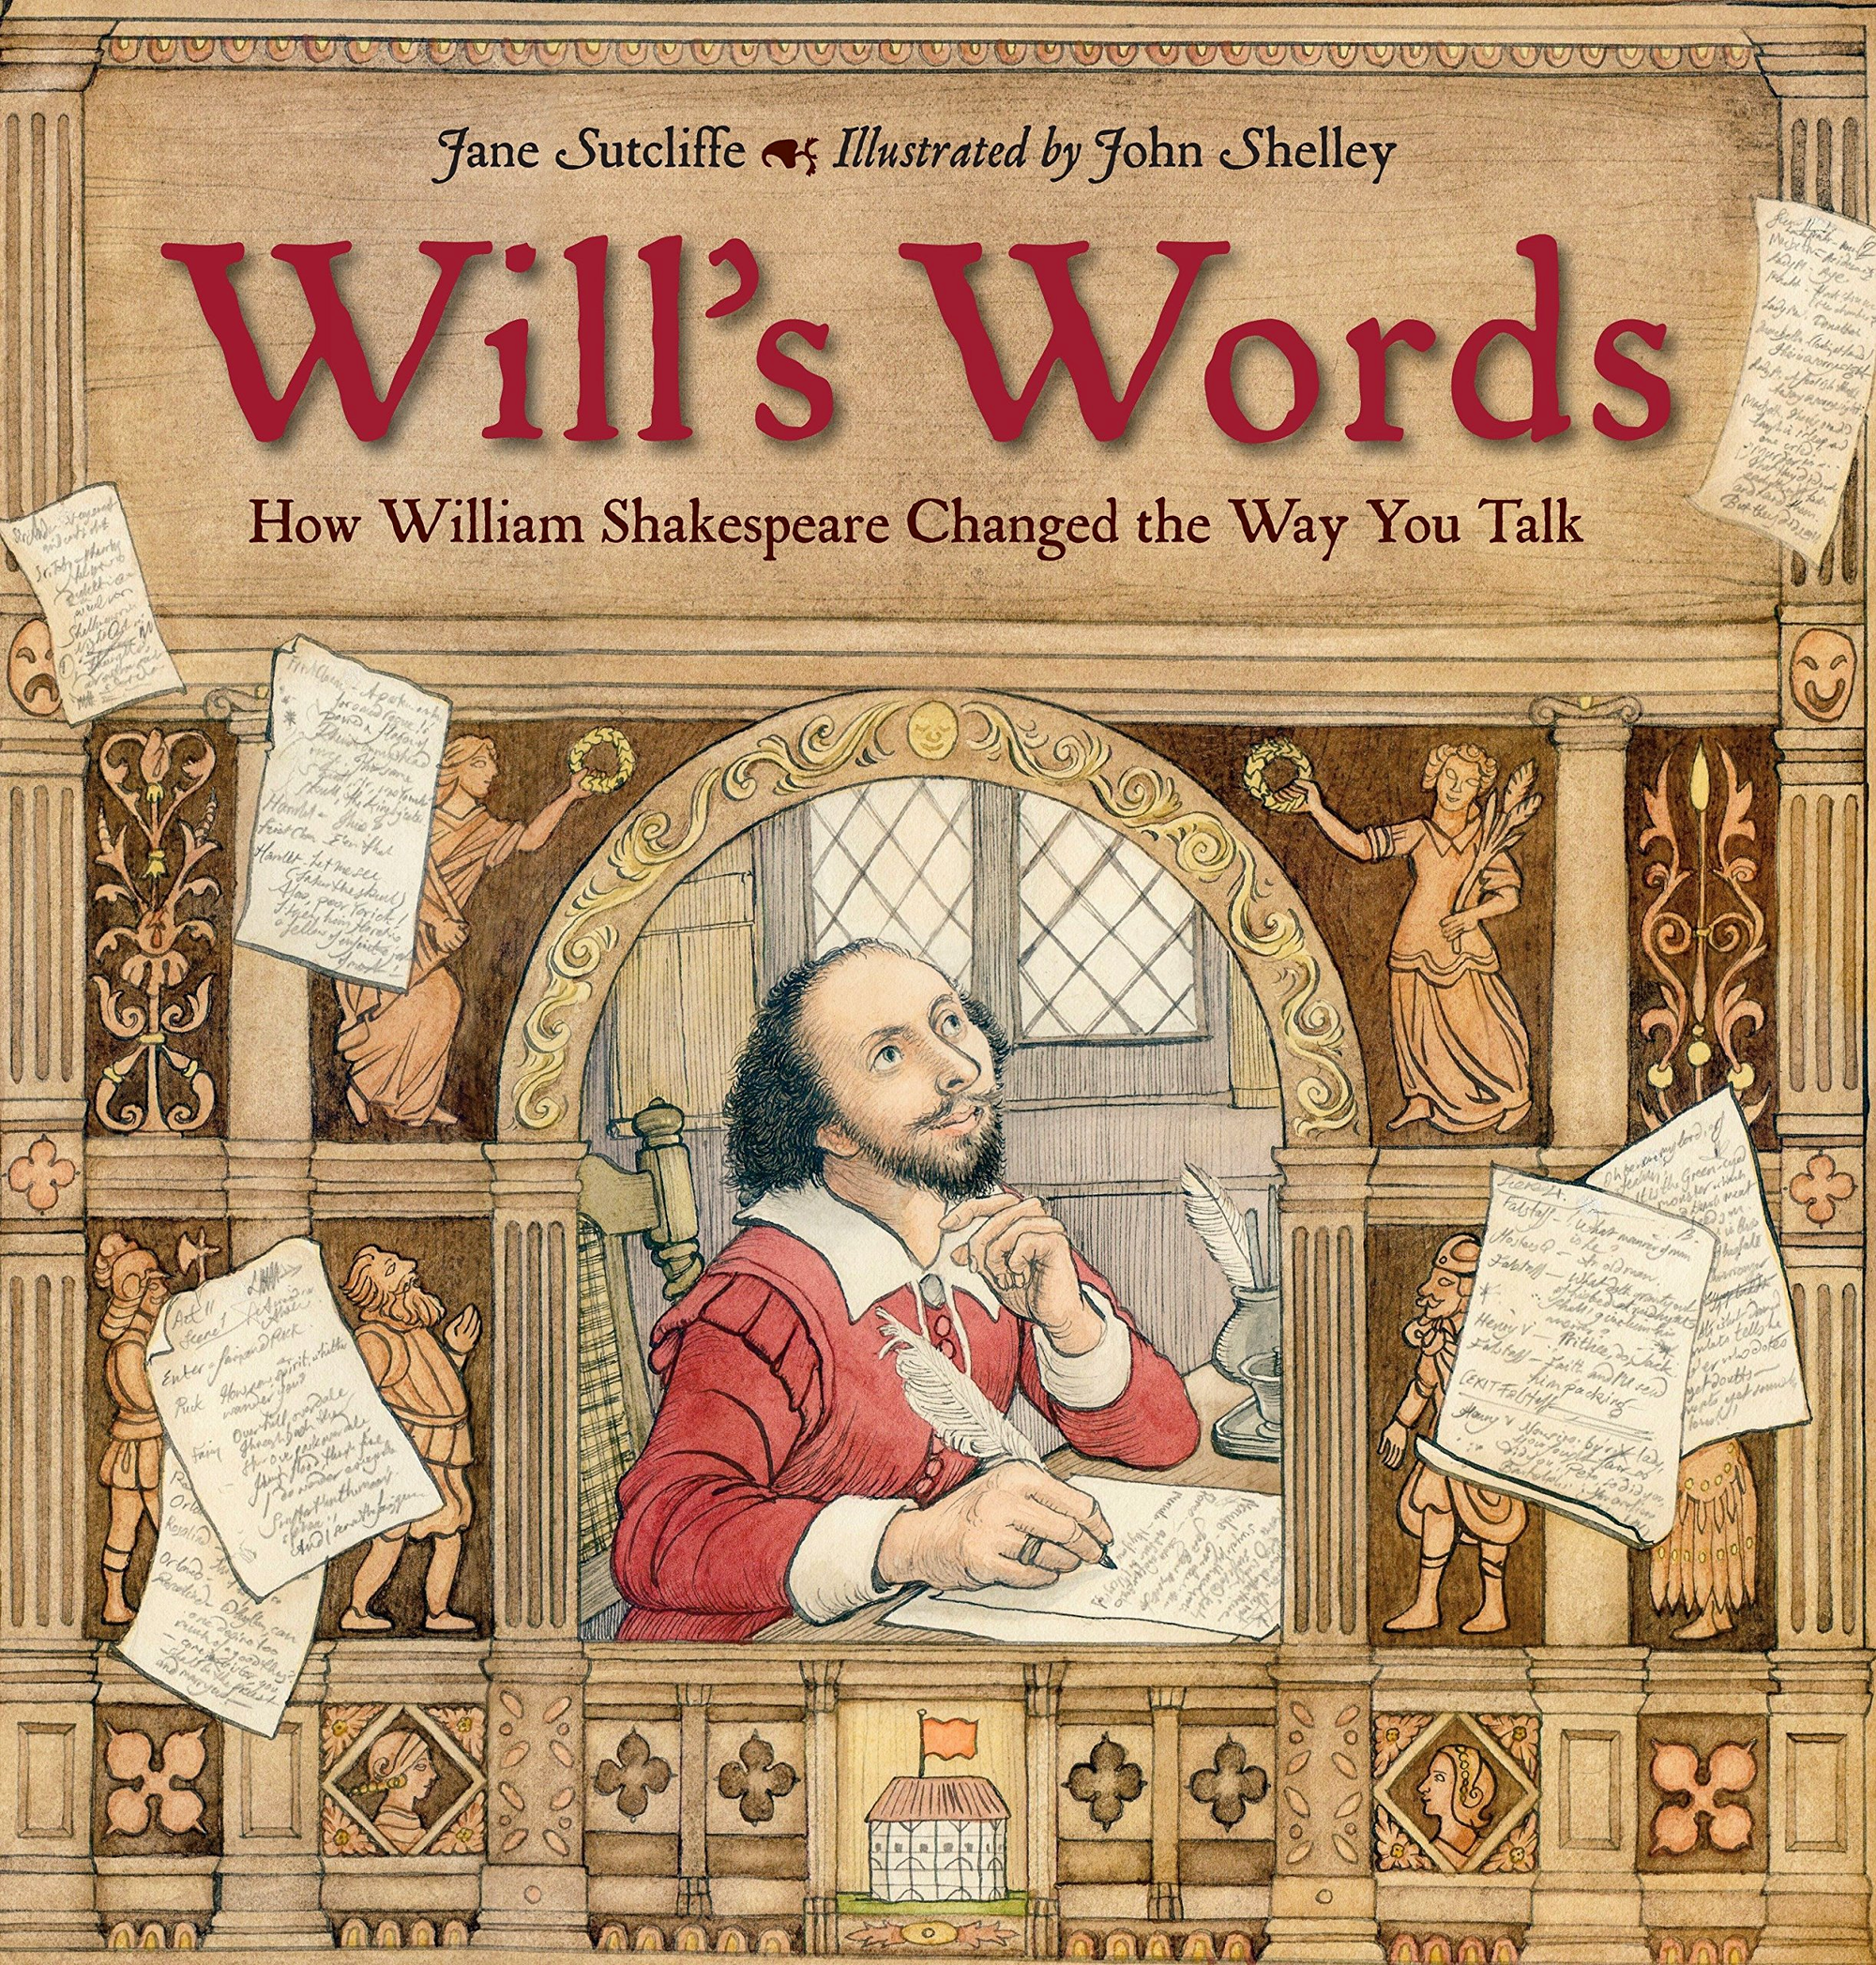 Cover of a book, "Will's Words"